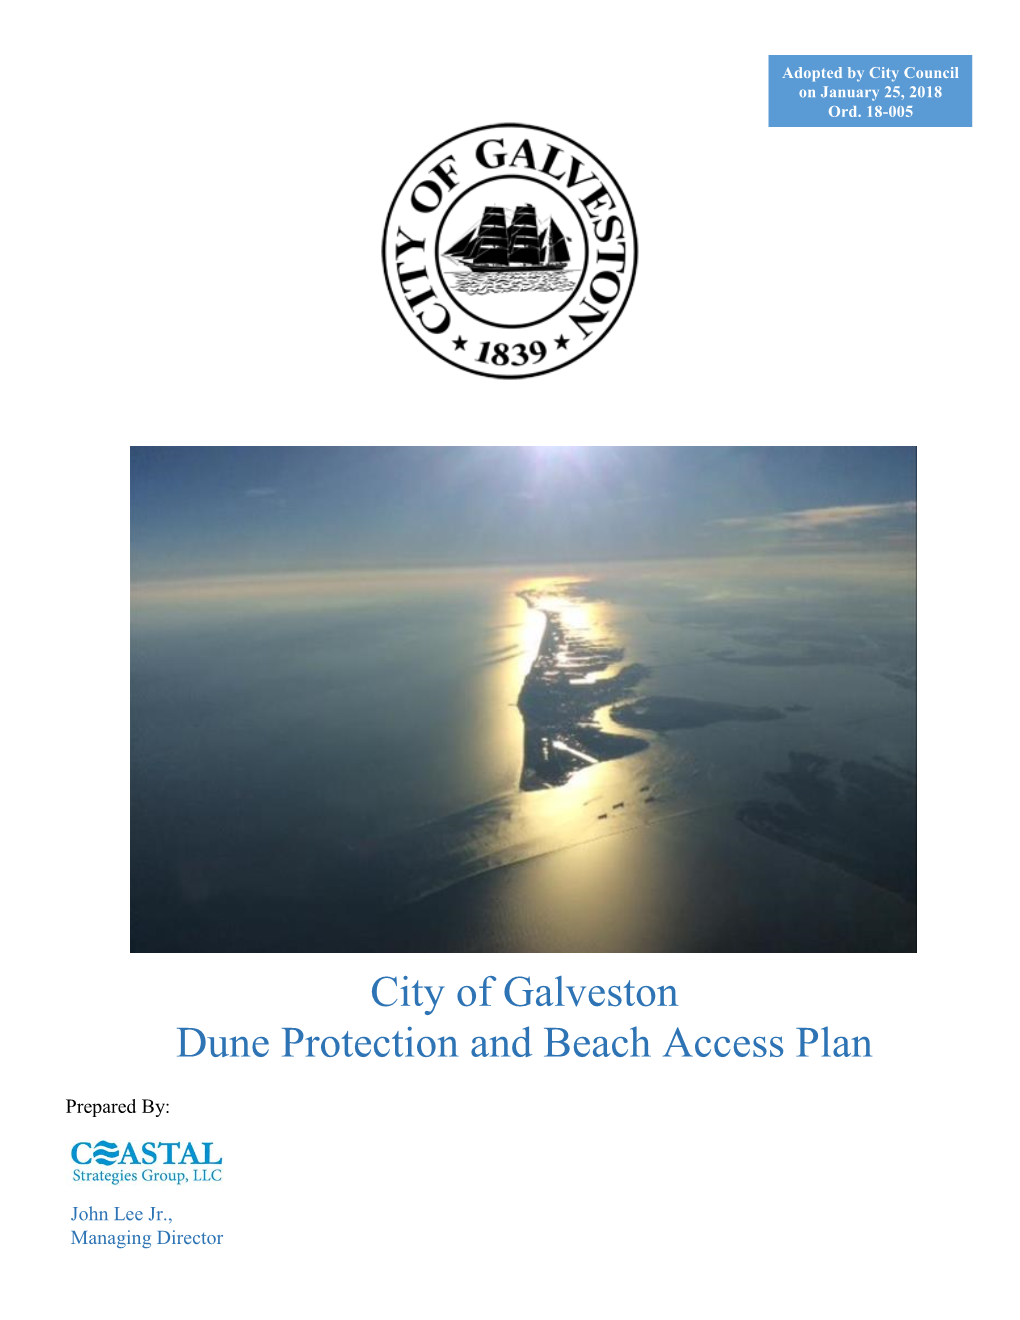 City of Galveston Dune Protection and Beach Access Plan